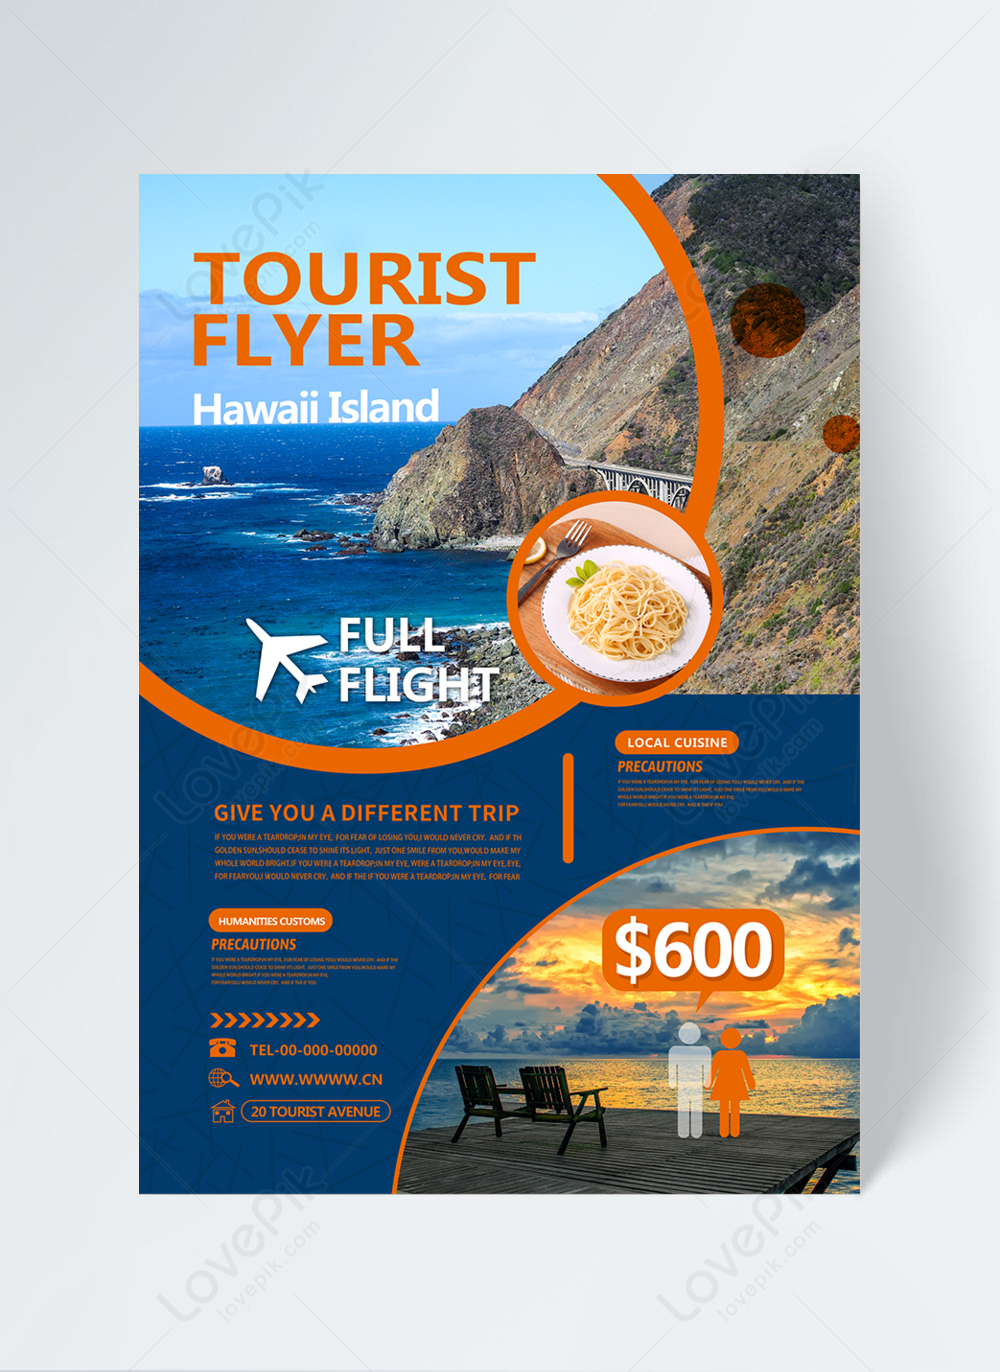 Fashion travel flyer template image_picture free download Pertaining To Bus Trip Flyer Templates Free